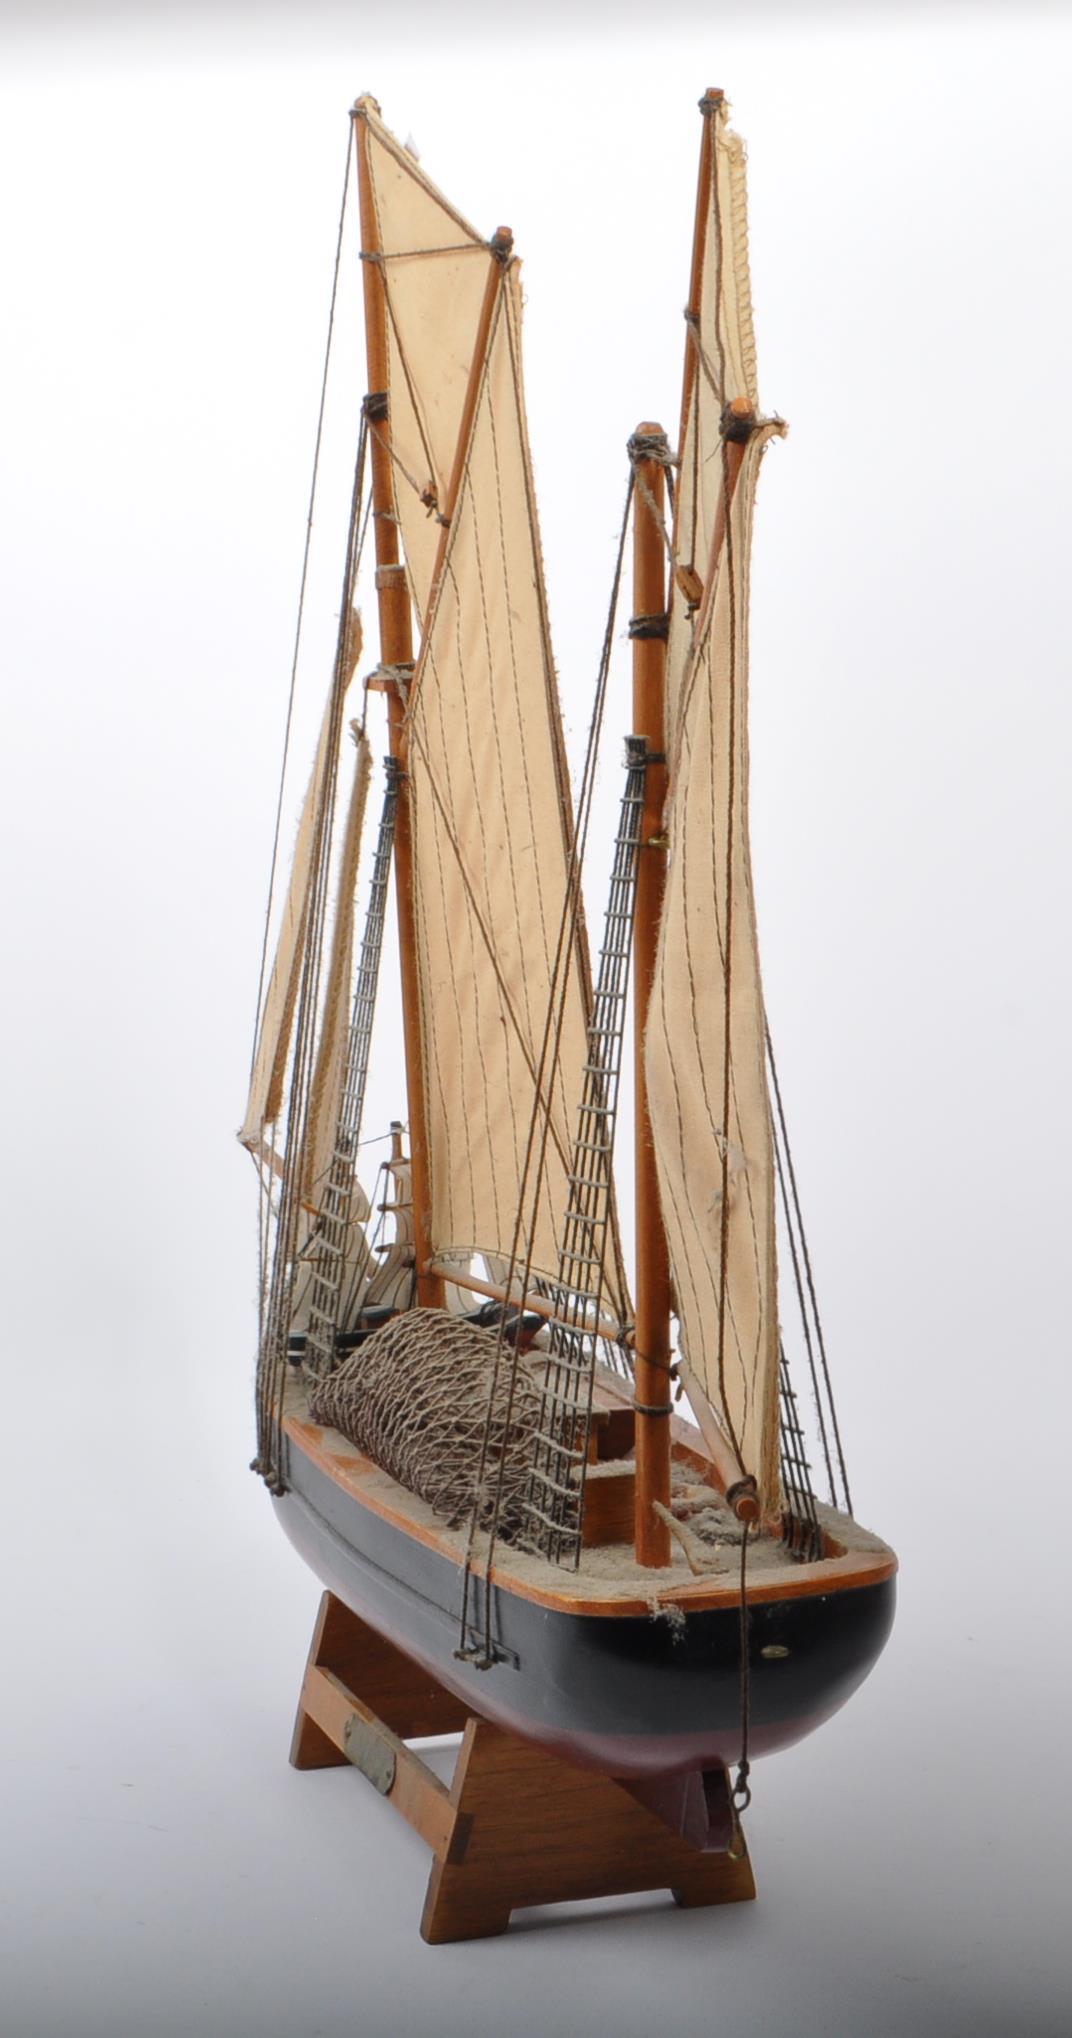 EARLY 20TH CENTURY WOODEN DISPLAY SAILING BOAT / YACHT - Image 5 of 7